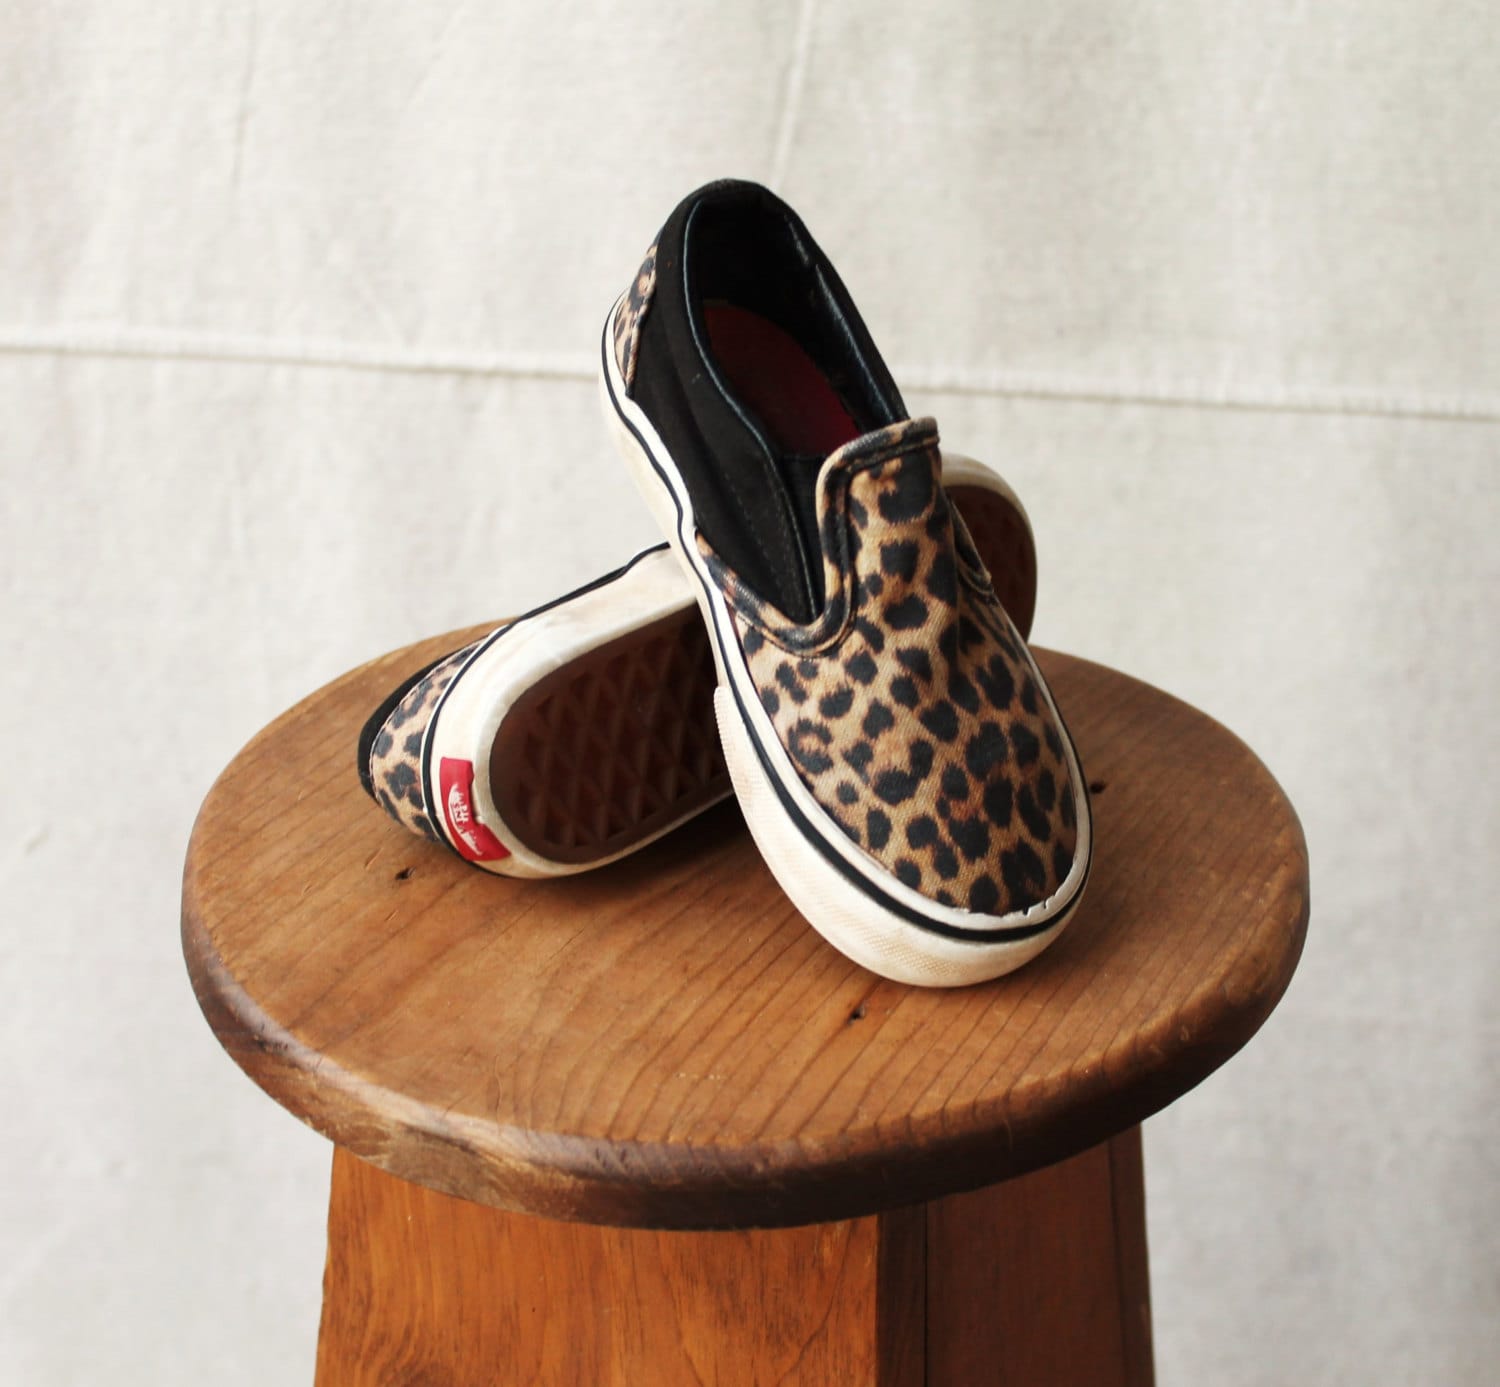 V is for VANS in Leopard Print Slip on Style Tennis Shoes